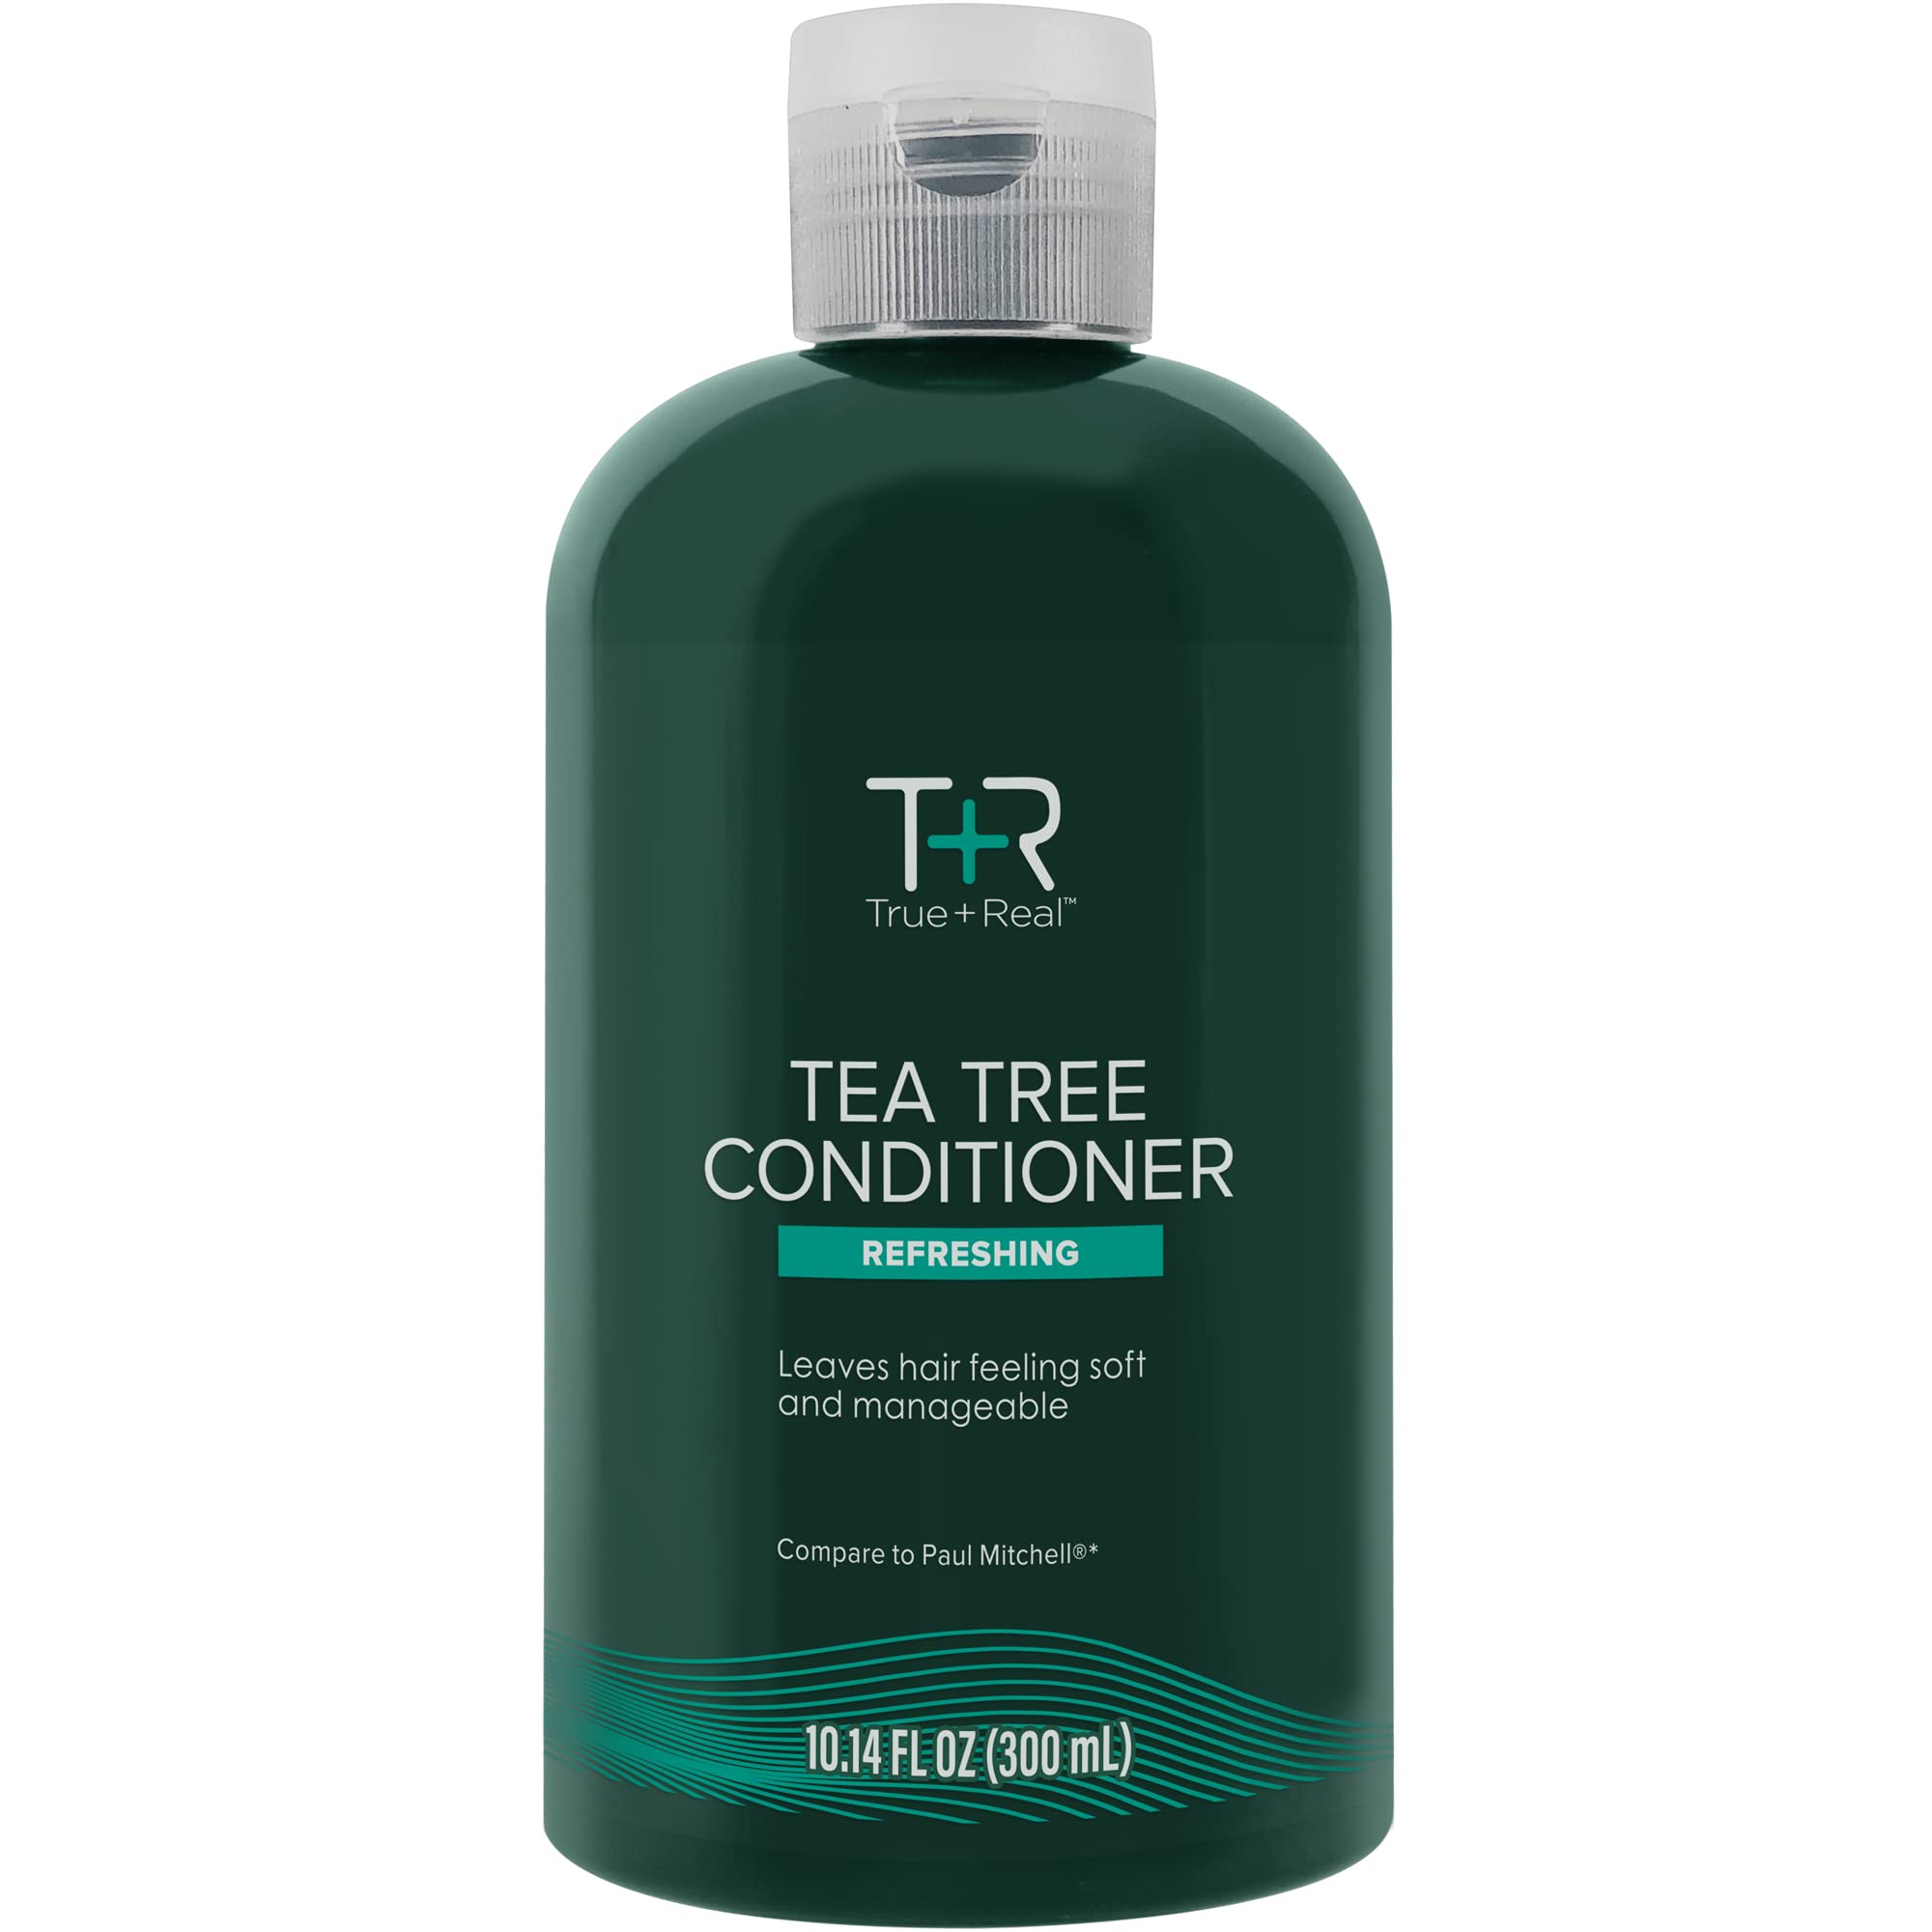 True+Real Tea Tree Conditioner, Moisturizing Formula, Hydrates, Soothes Scalp, Refreshing Mint Scent, For All Hair Types, 10.14 oz